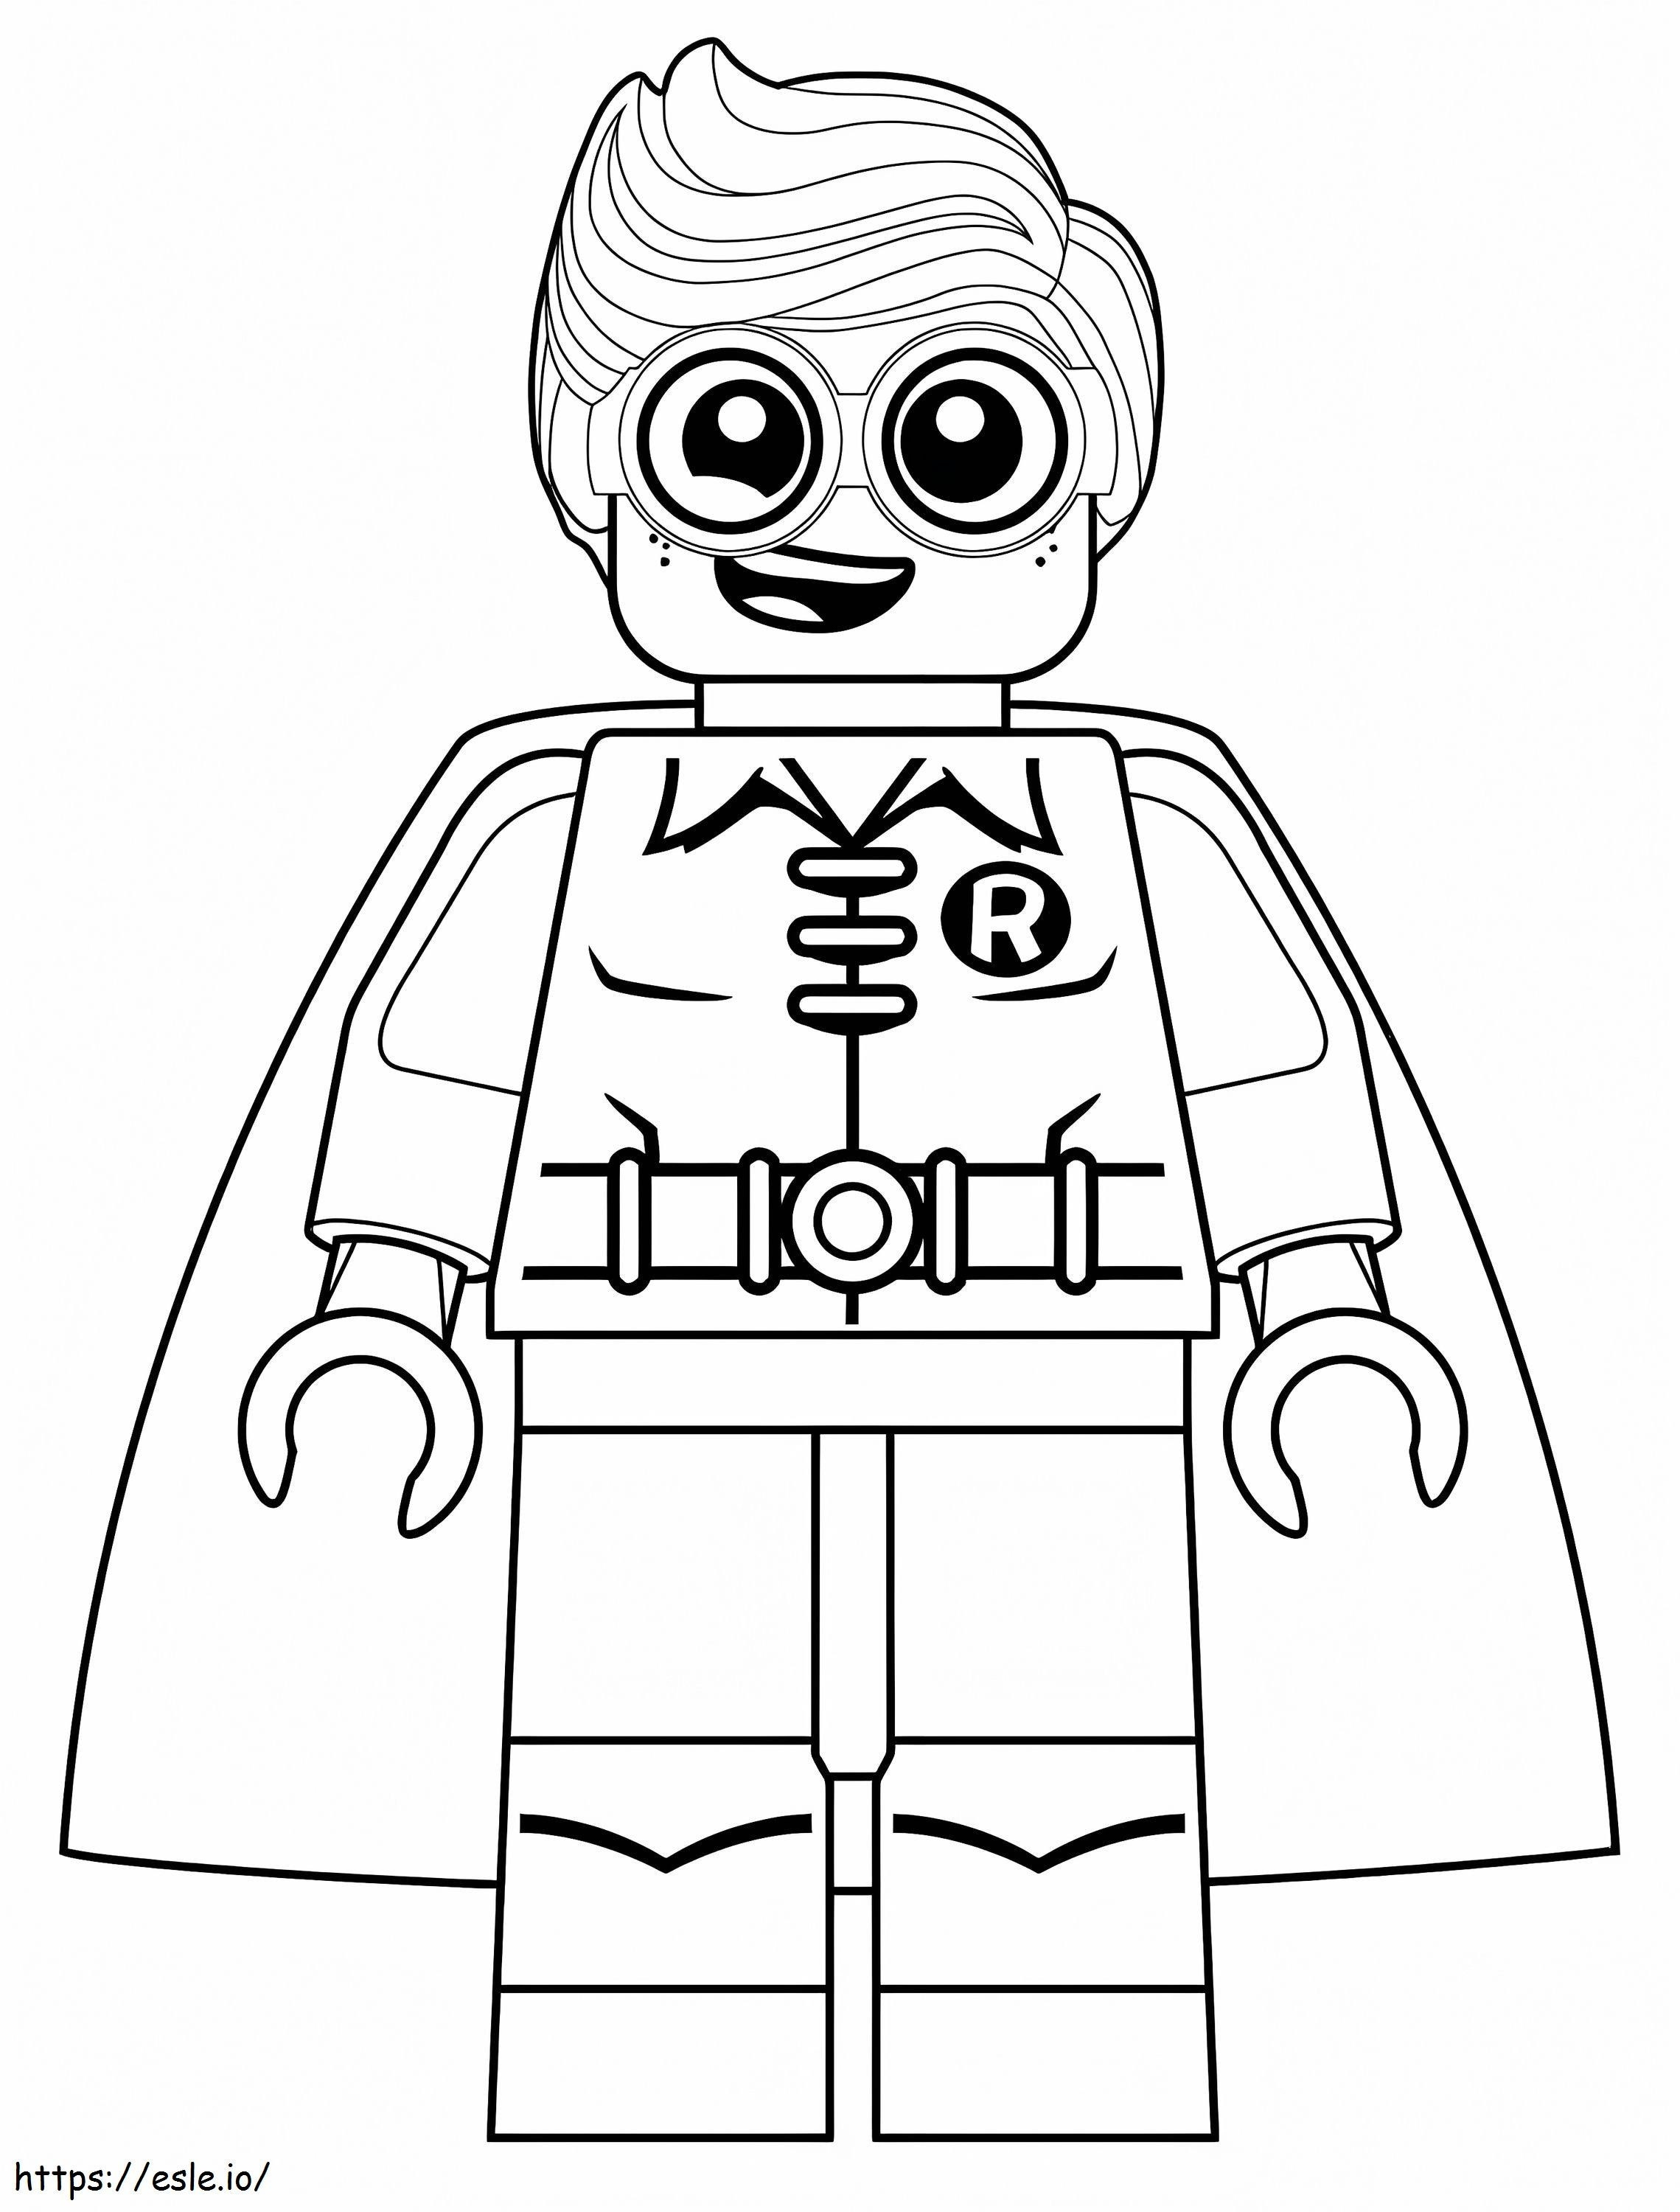 Lego Robin 1 coloring page